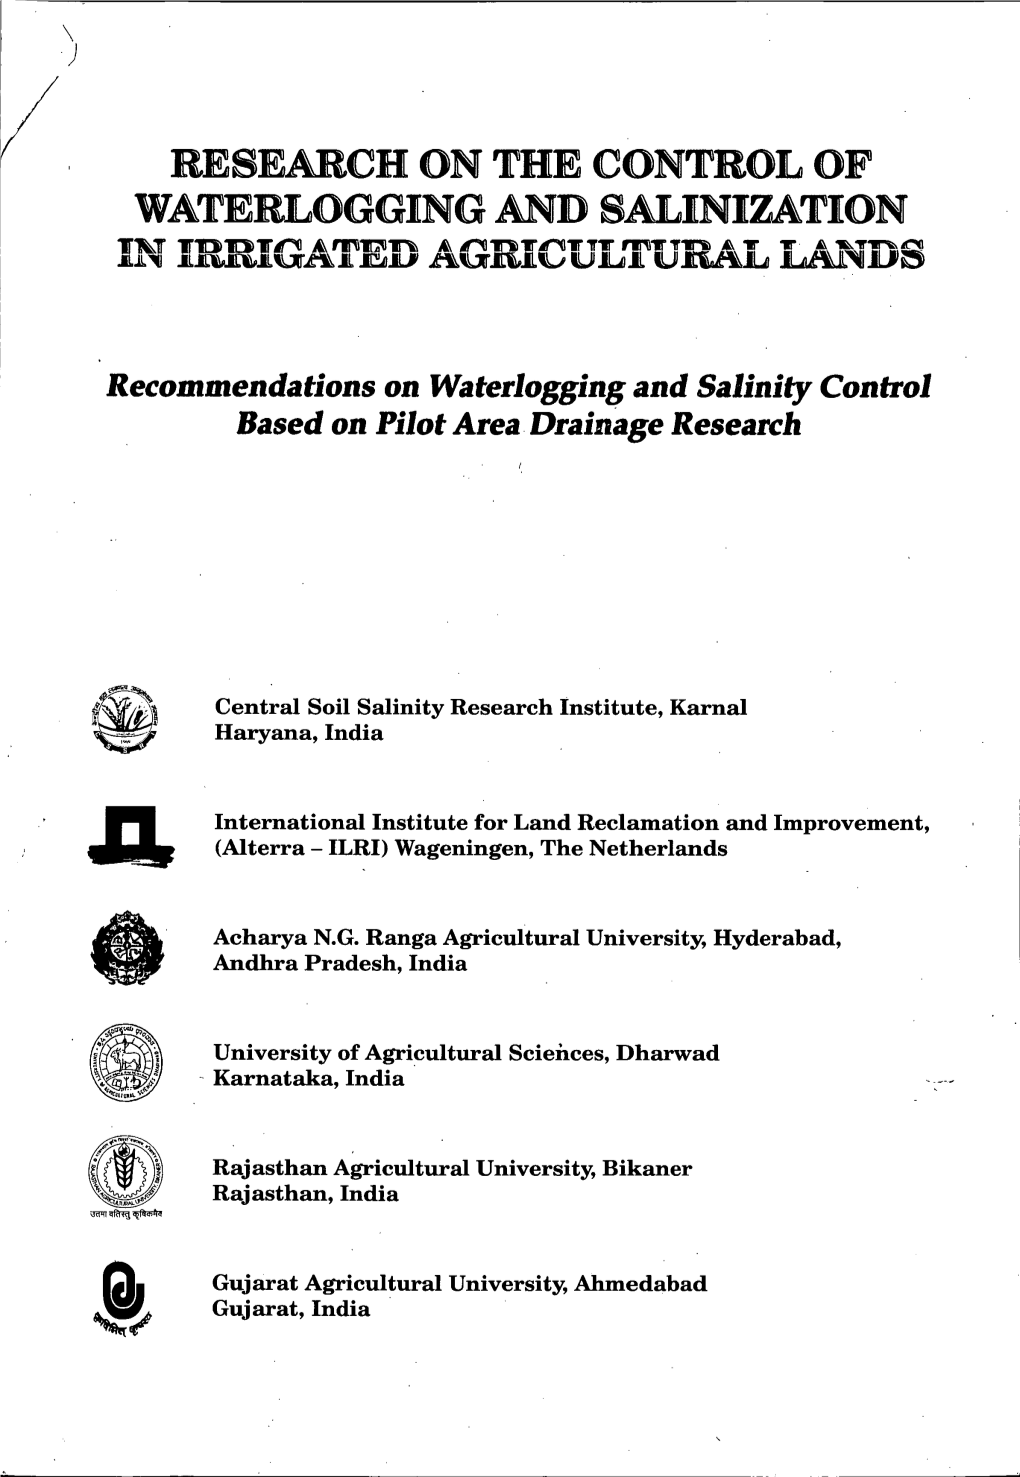 Recommendations on Waterlogging and Salinity Control Based on Pilot Area Drainage Research